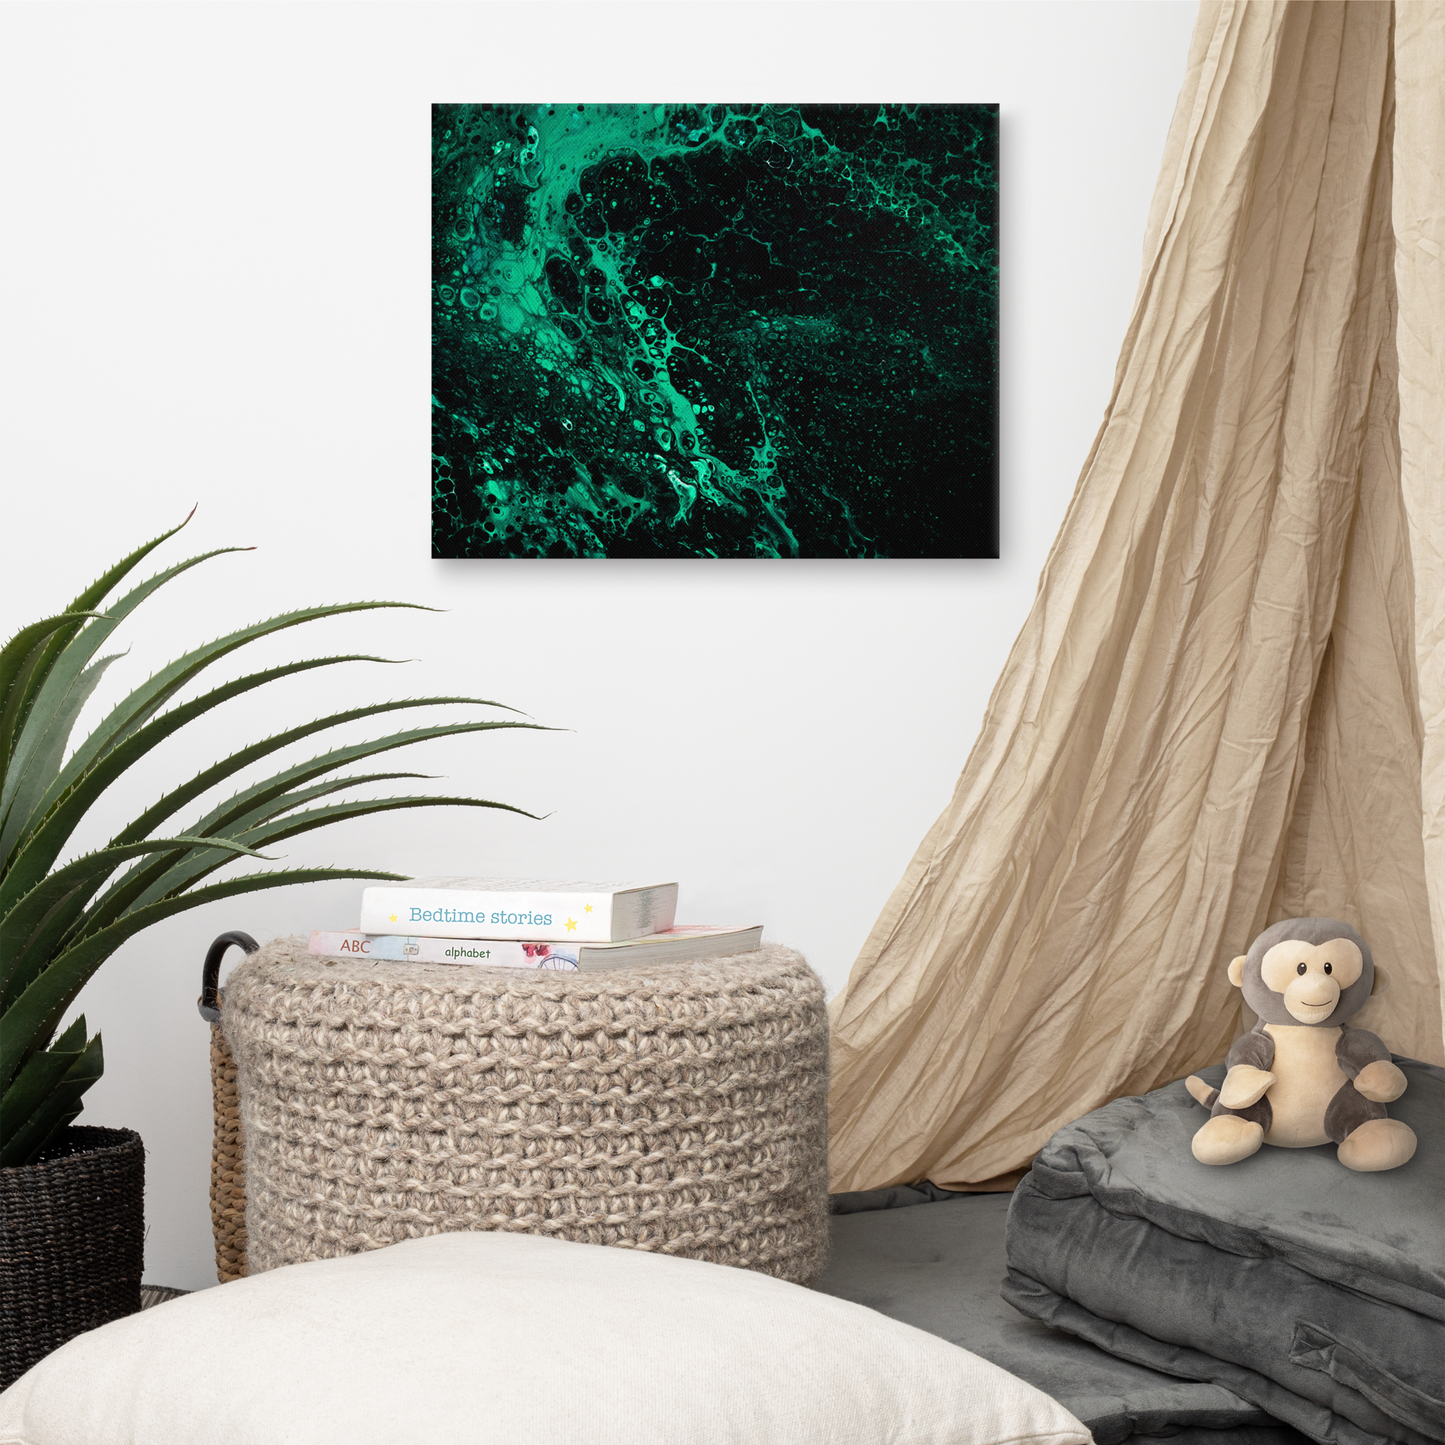 NightOwl Studio Abstract Wall Art, Green Tide, Boho Living Room, Bedroom, Office, and Home Decor, Premium Canvas with Wooden Frame, Acrylic Painting Reproduction, 16” x 20”